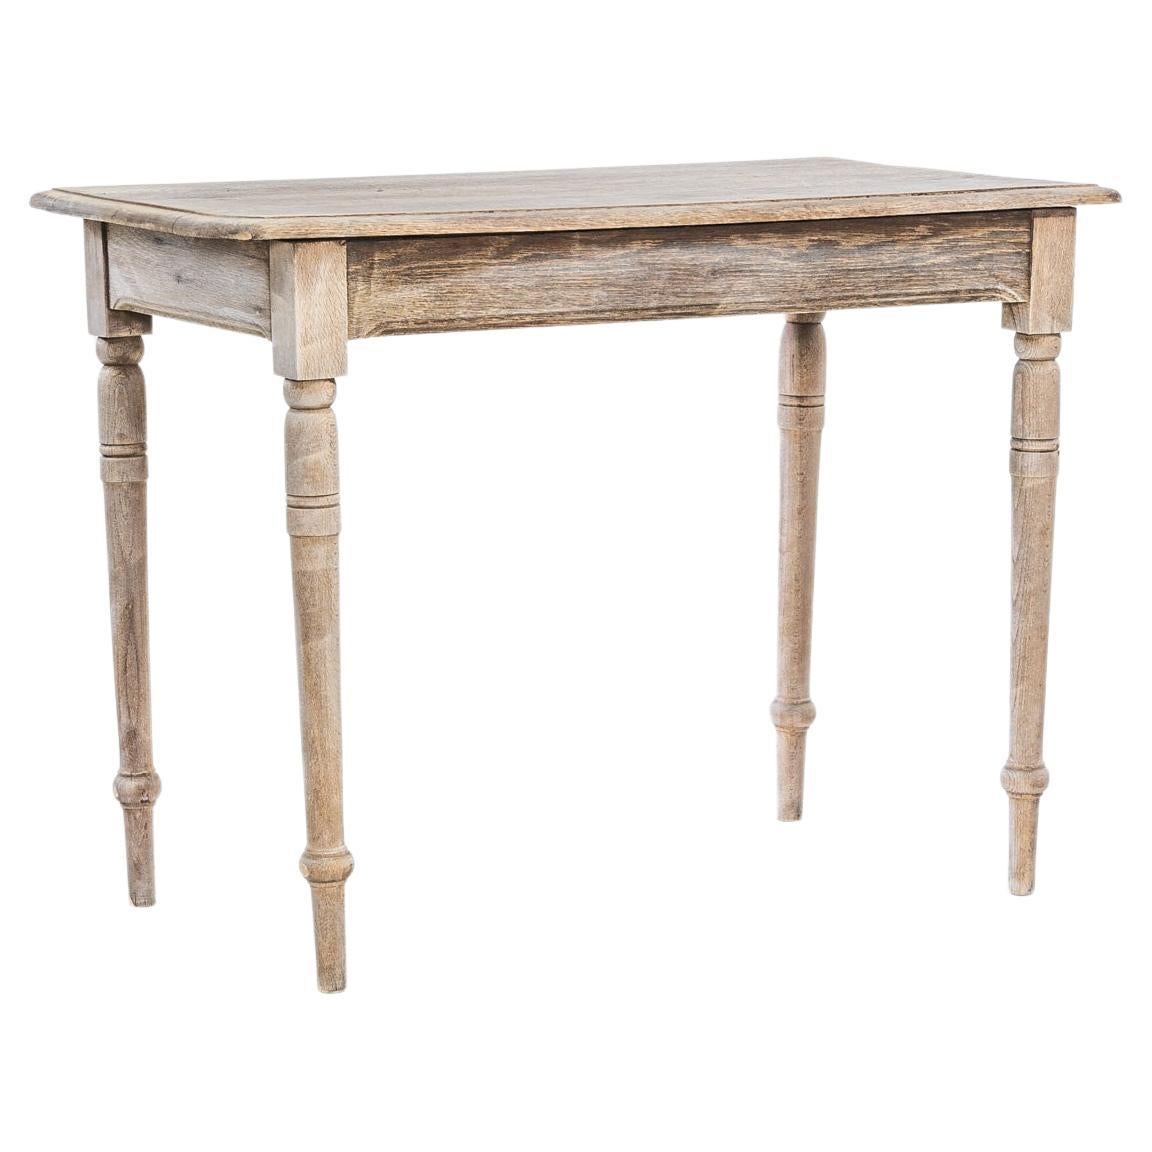 1920s French Bleached Oak Table